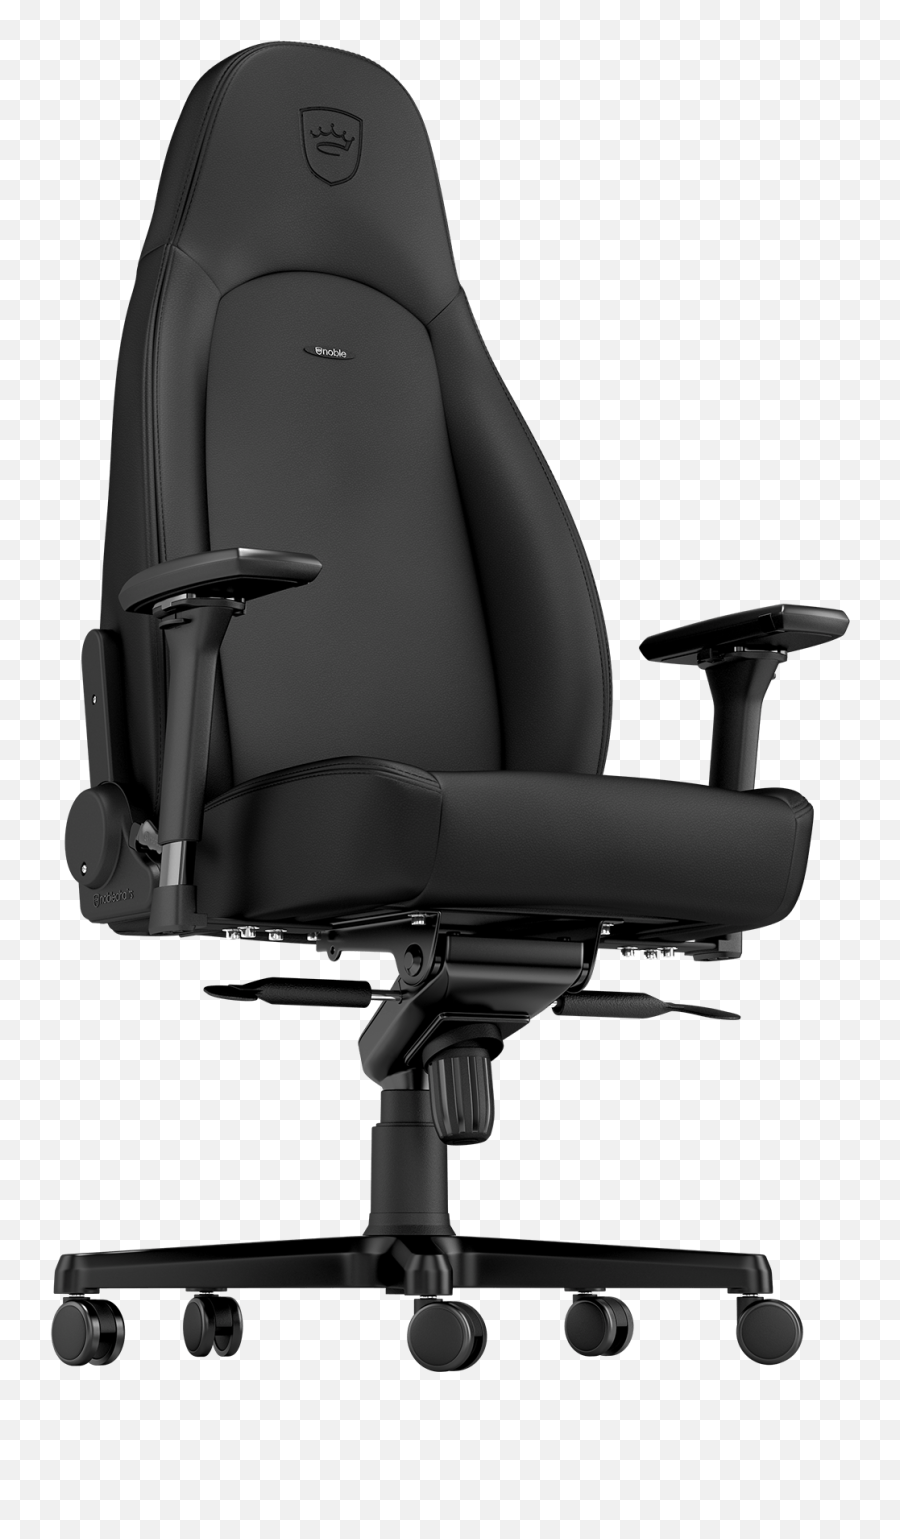 Xbox Gaming Chair Png Pic Arts - Racing Bucket Chair,Gaming Chair Png